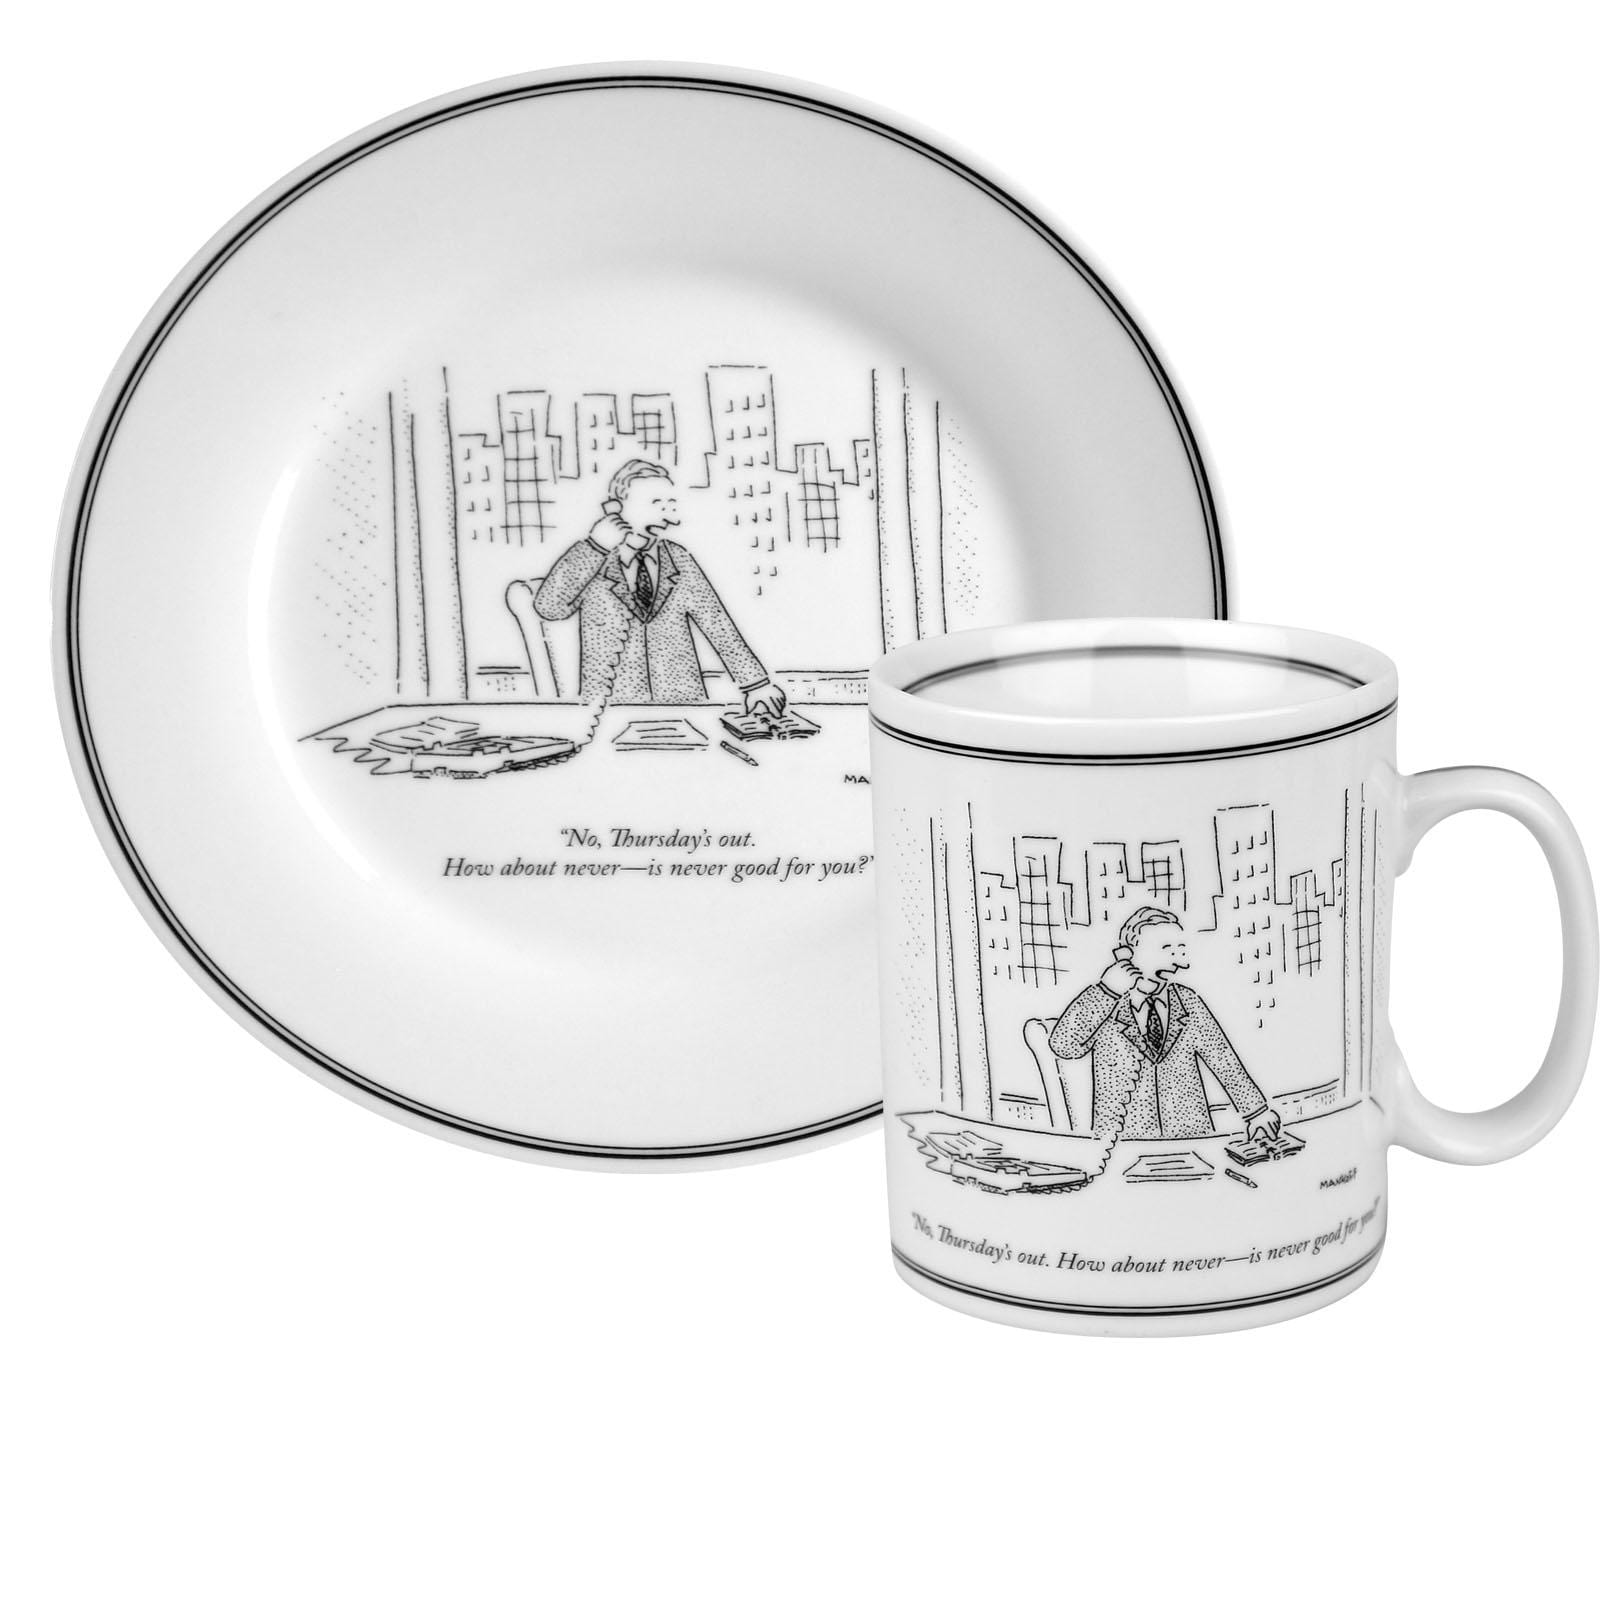   Yorker Collection Thursday is Out Mug and Plate Set  